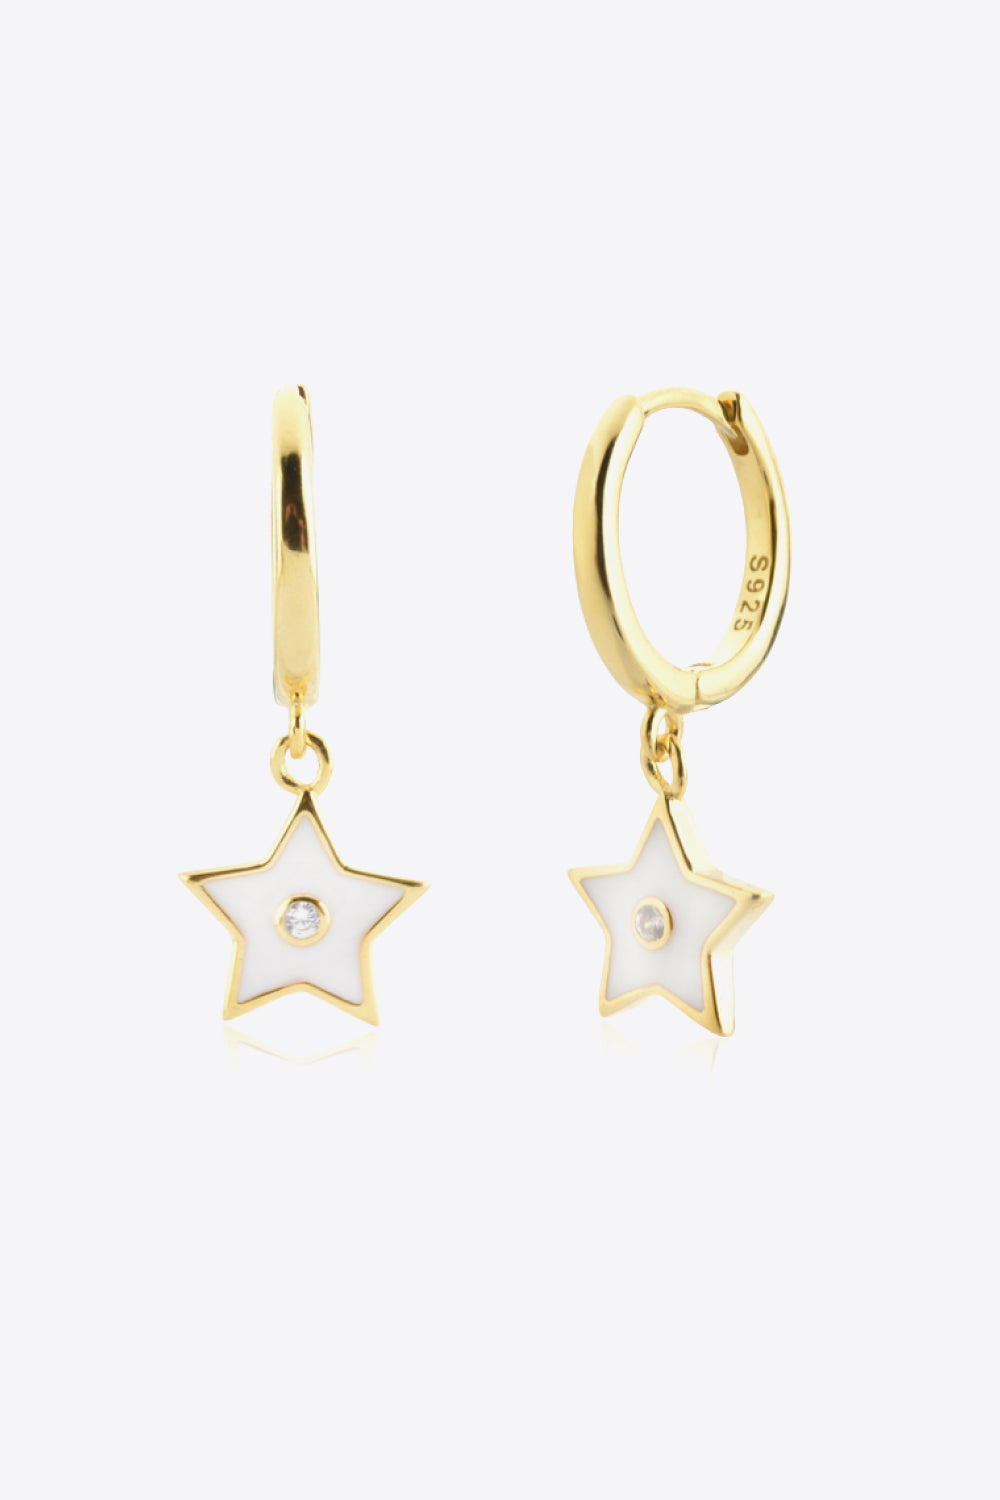 You Are a Shining Star Earrings